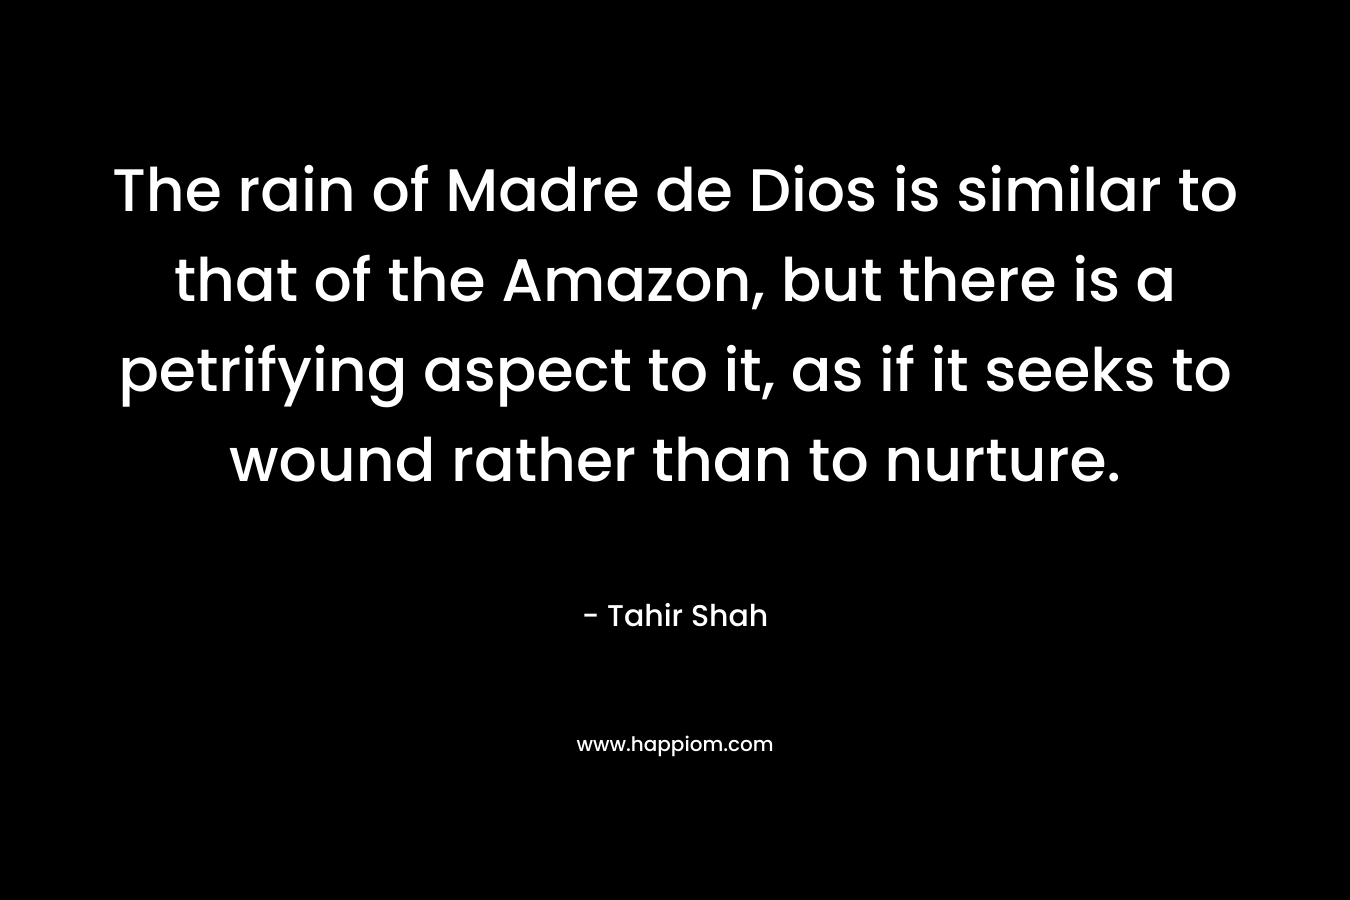 The rain of Madre de Dios is similar to that of the Amazon, but there is a petrifying aspect to it, as if it seeks to wound rather than to nurture.